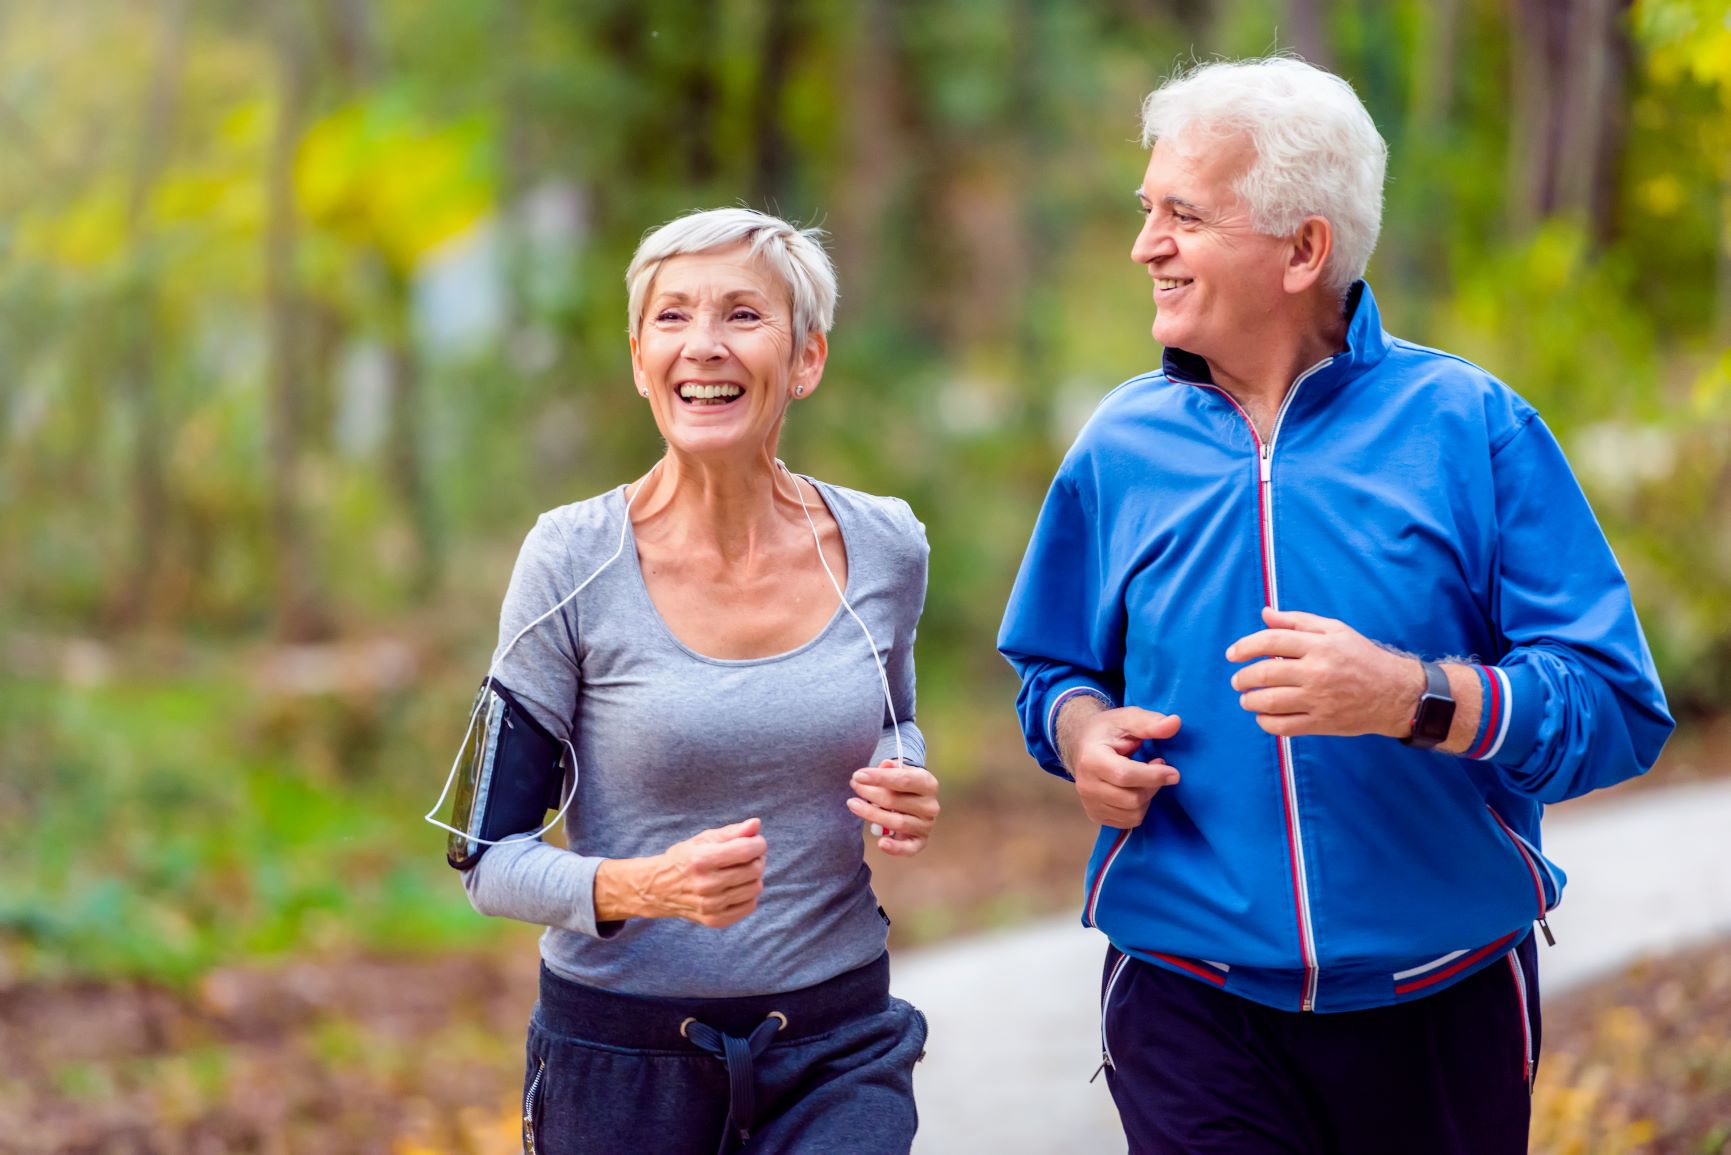 Regular exercise is one of several factors that can improve heart health, which has been linked to a lower risk of dementia. Talk with one of our heart doctors to learn more.